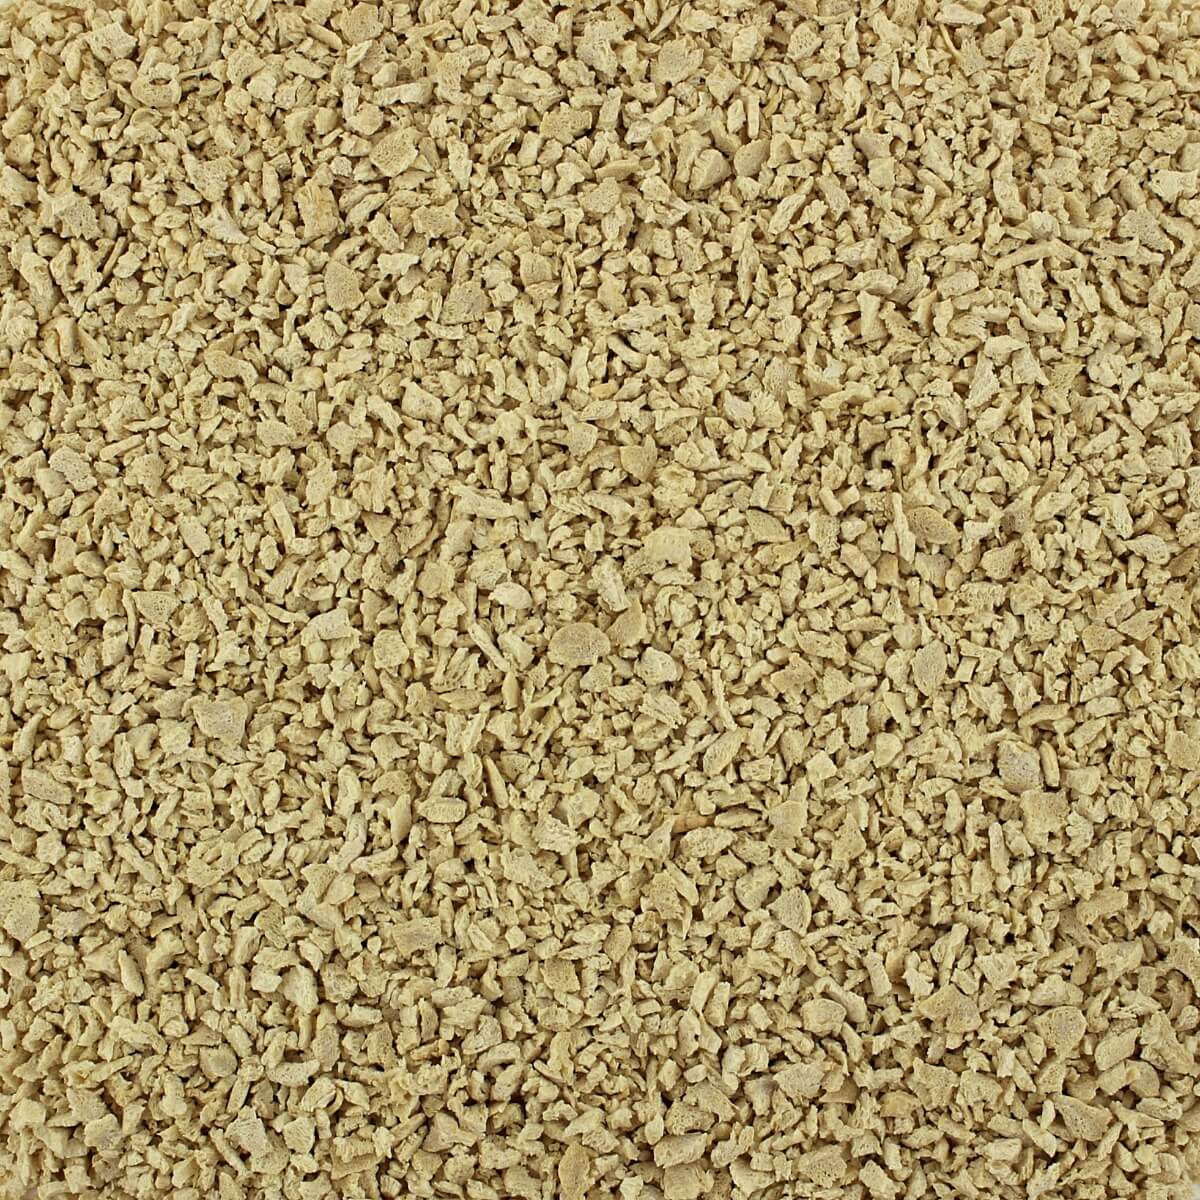 A close up image of a beige textured background featuring the Harmony House Deluxe Plant-Based Protein Sampler.